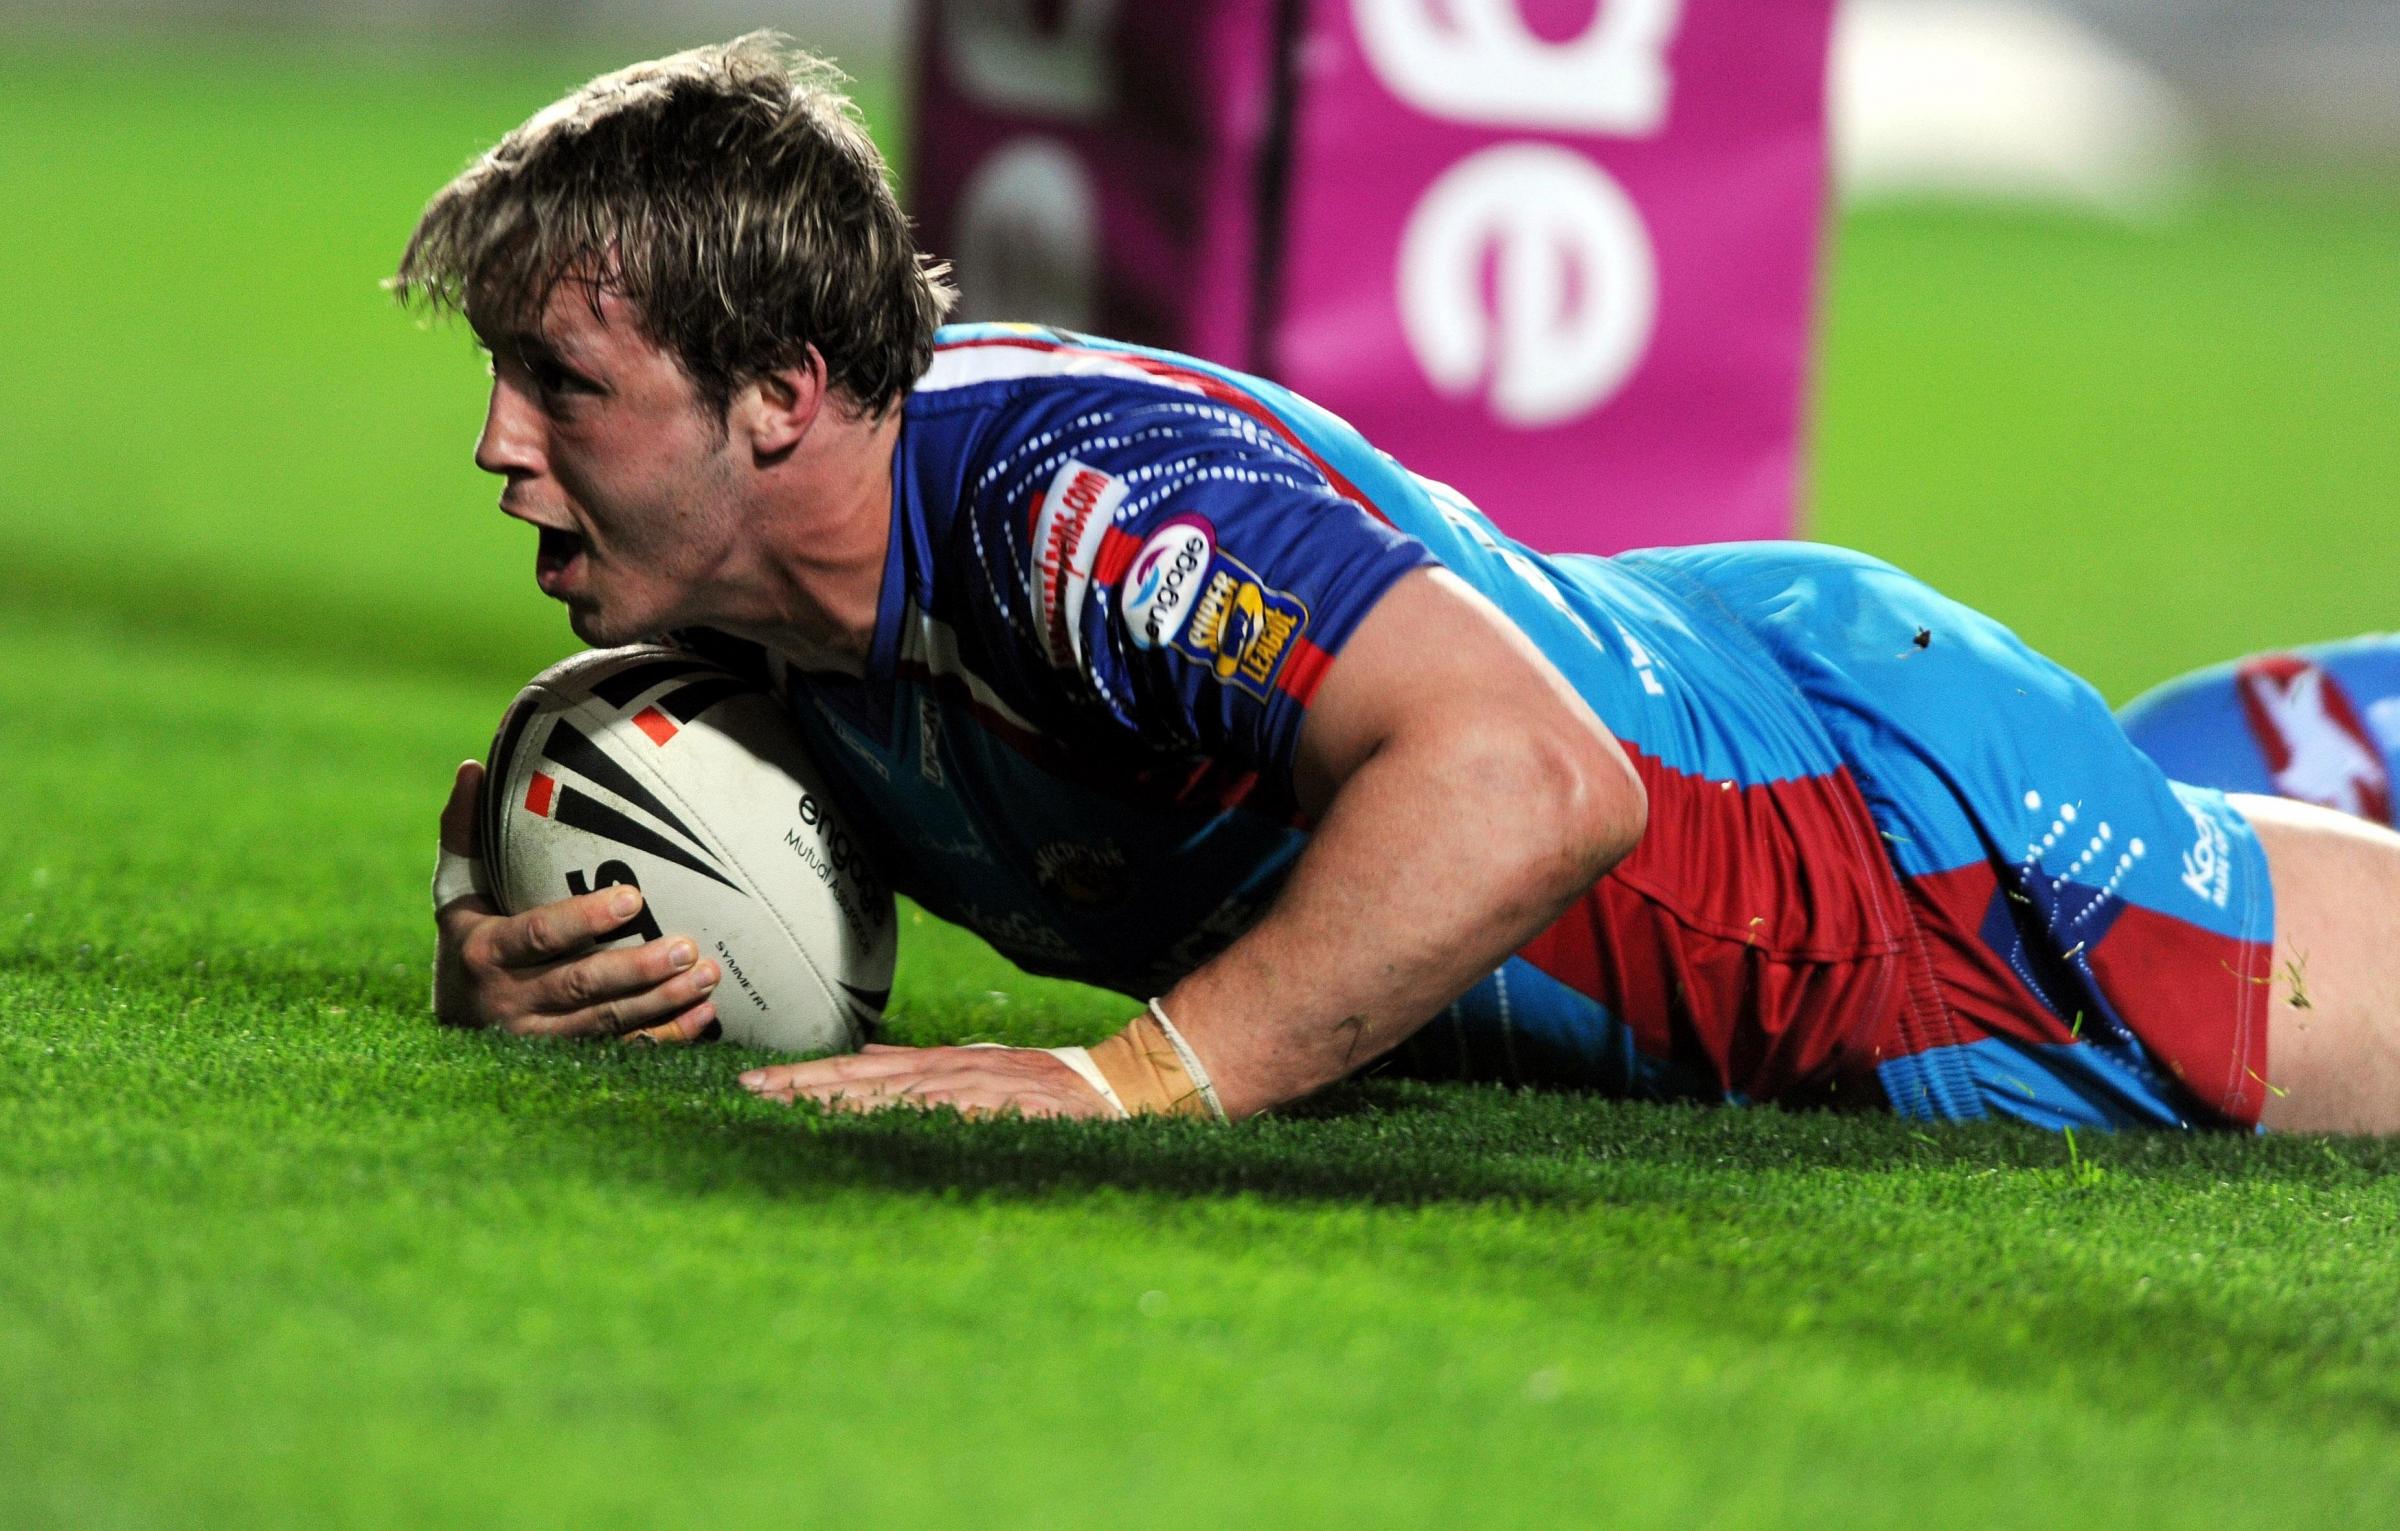 SCORE: Oliver Wilkes scores a try for Wakefield during the engage Super League match at the KC Stadium, Hull. Picture date: Friday April 17, 2009. Photo: Julia Hoyle/PA Wire